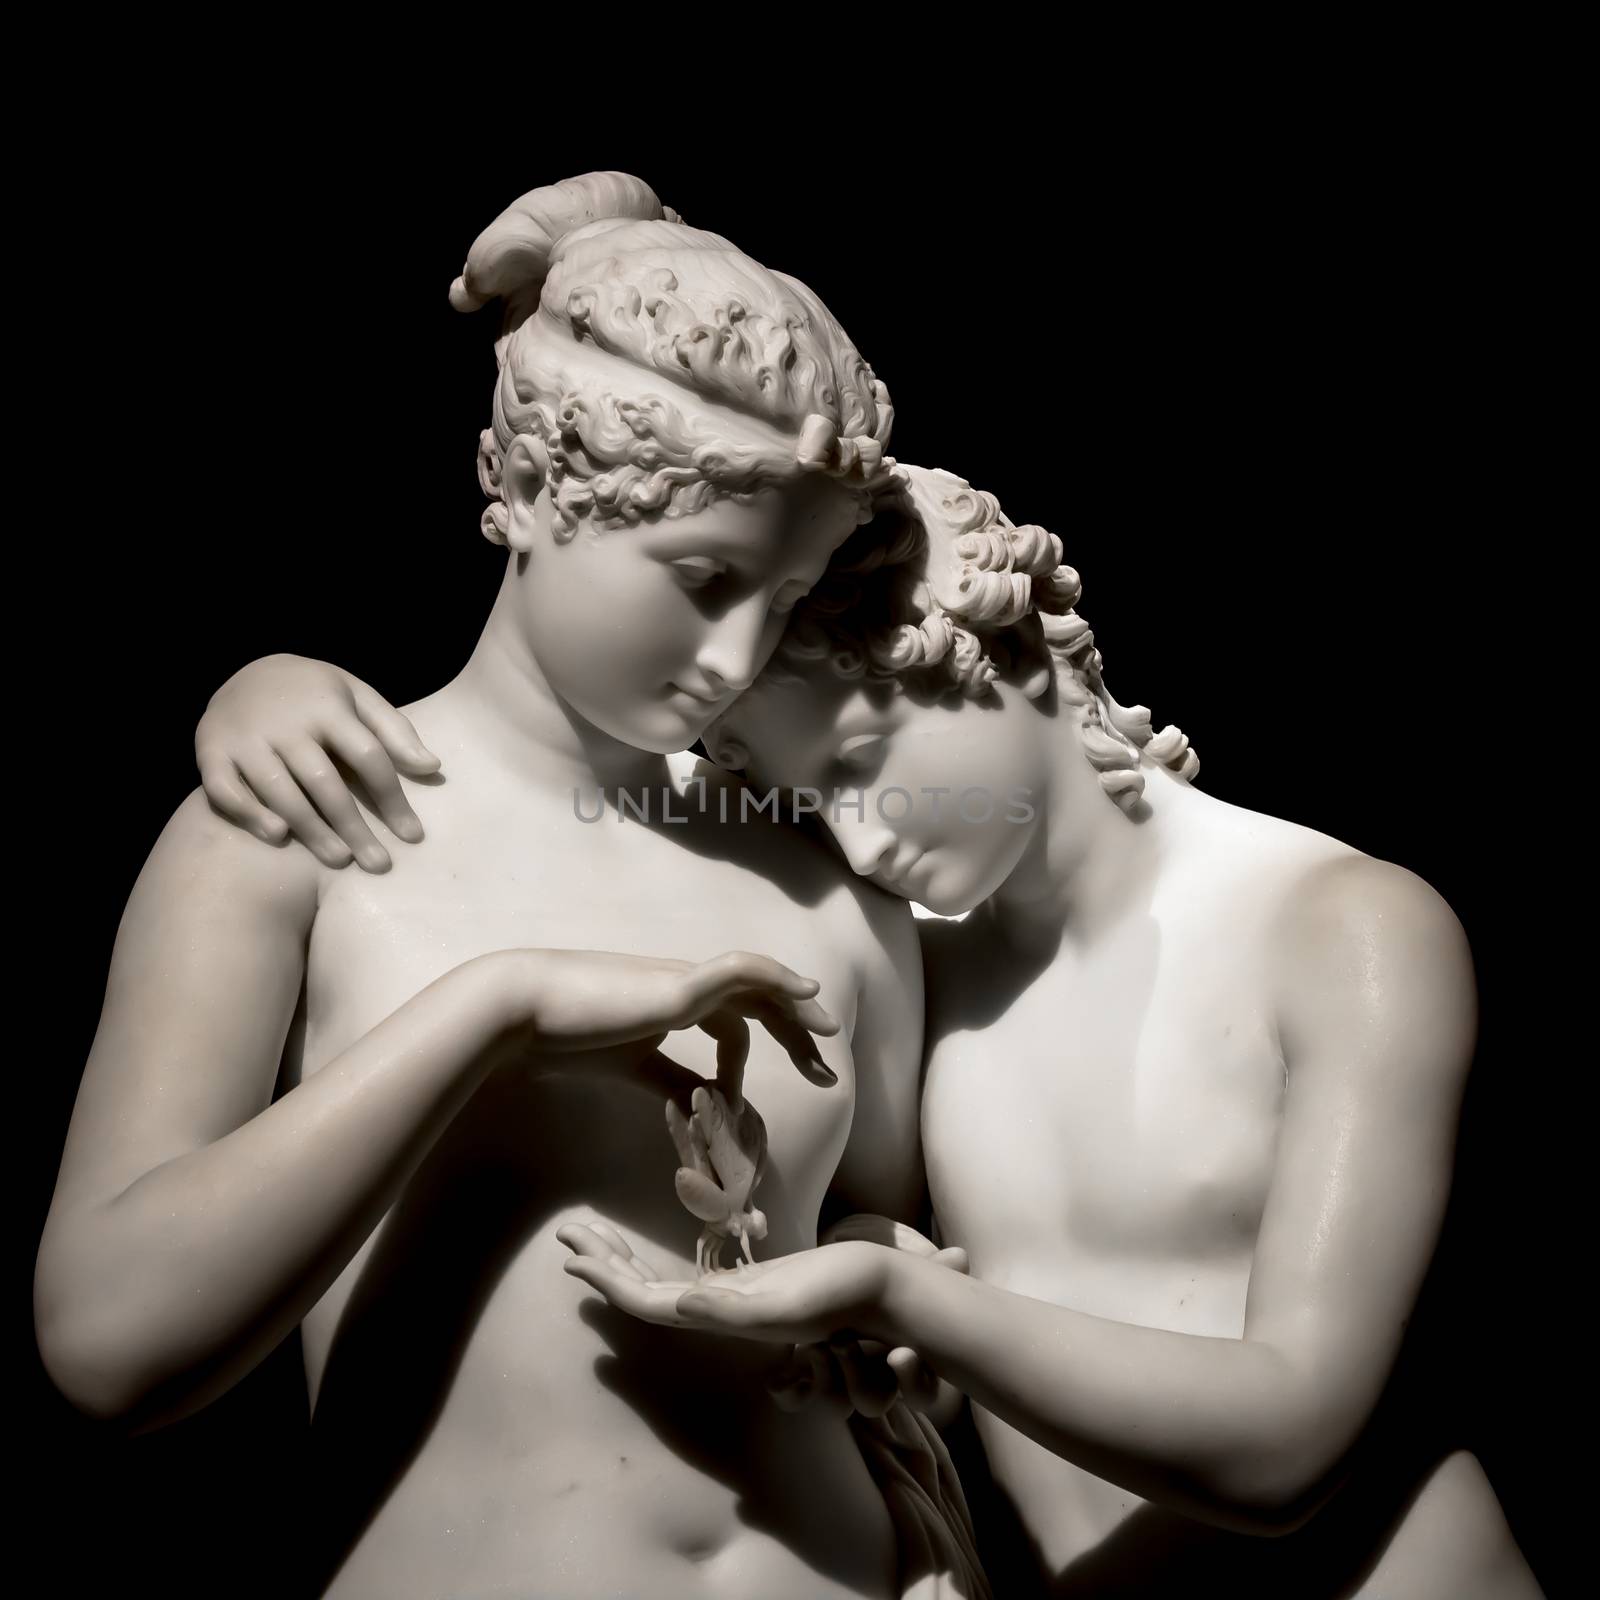 MILAN, ITALY - June 2020. Antonio Canova's masterpiece Cupid and Psyche (Amore e psiche, 1797), symbol of eternal love. Psyche raises Cupid left hand with her own, to place a butterfly on his palm. The butterfly symbolizes her soul, which she offers in all innocence to Cupid.